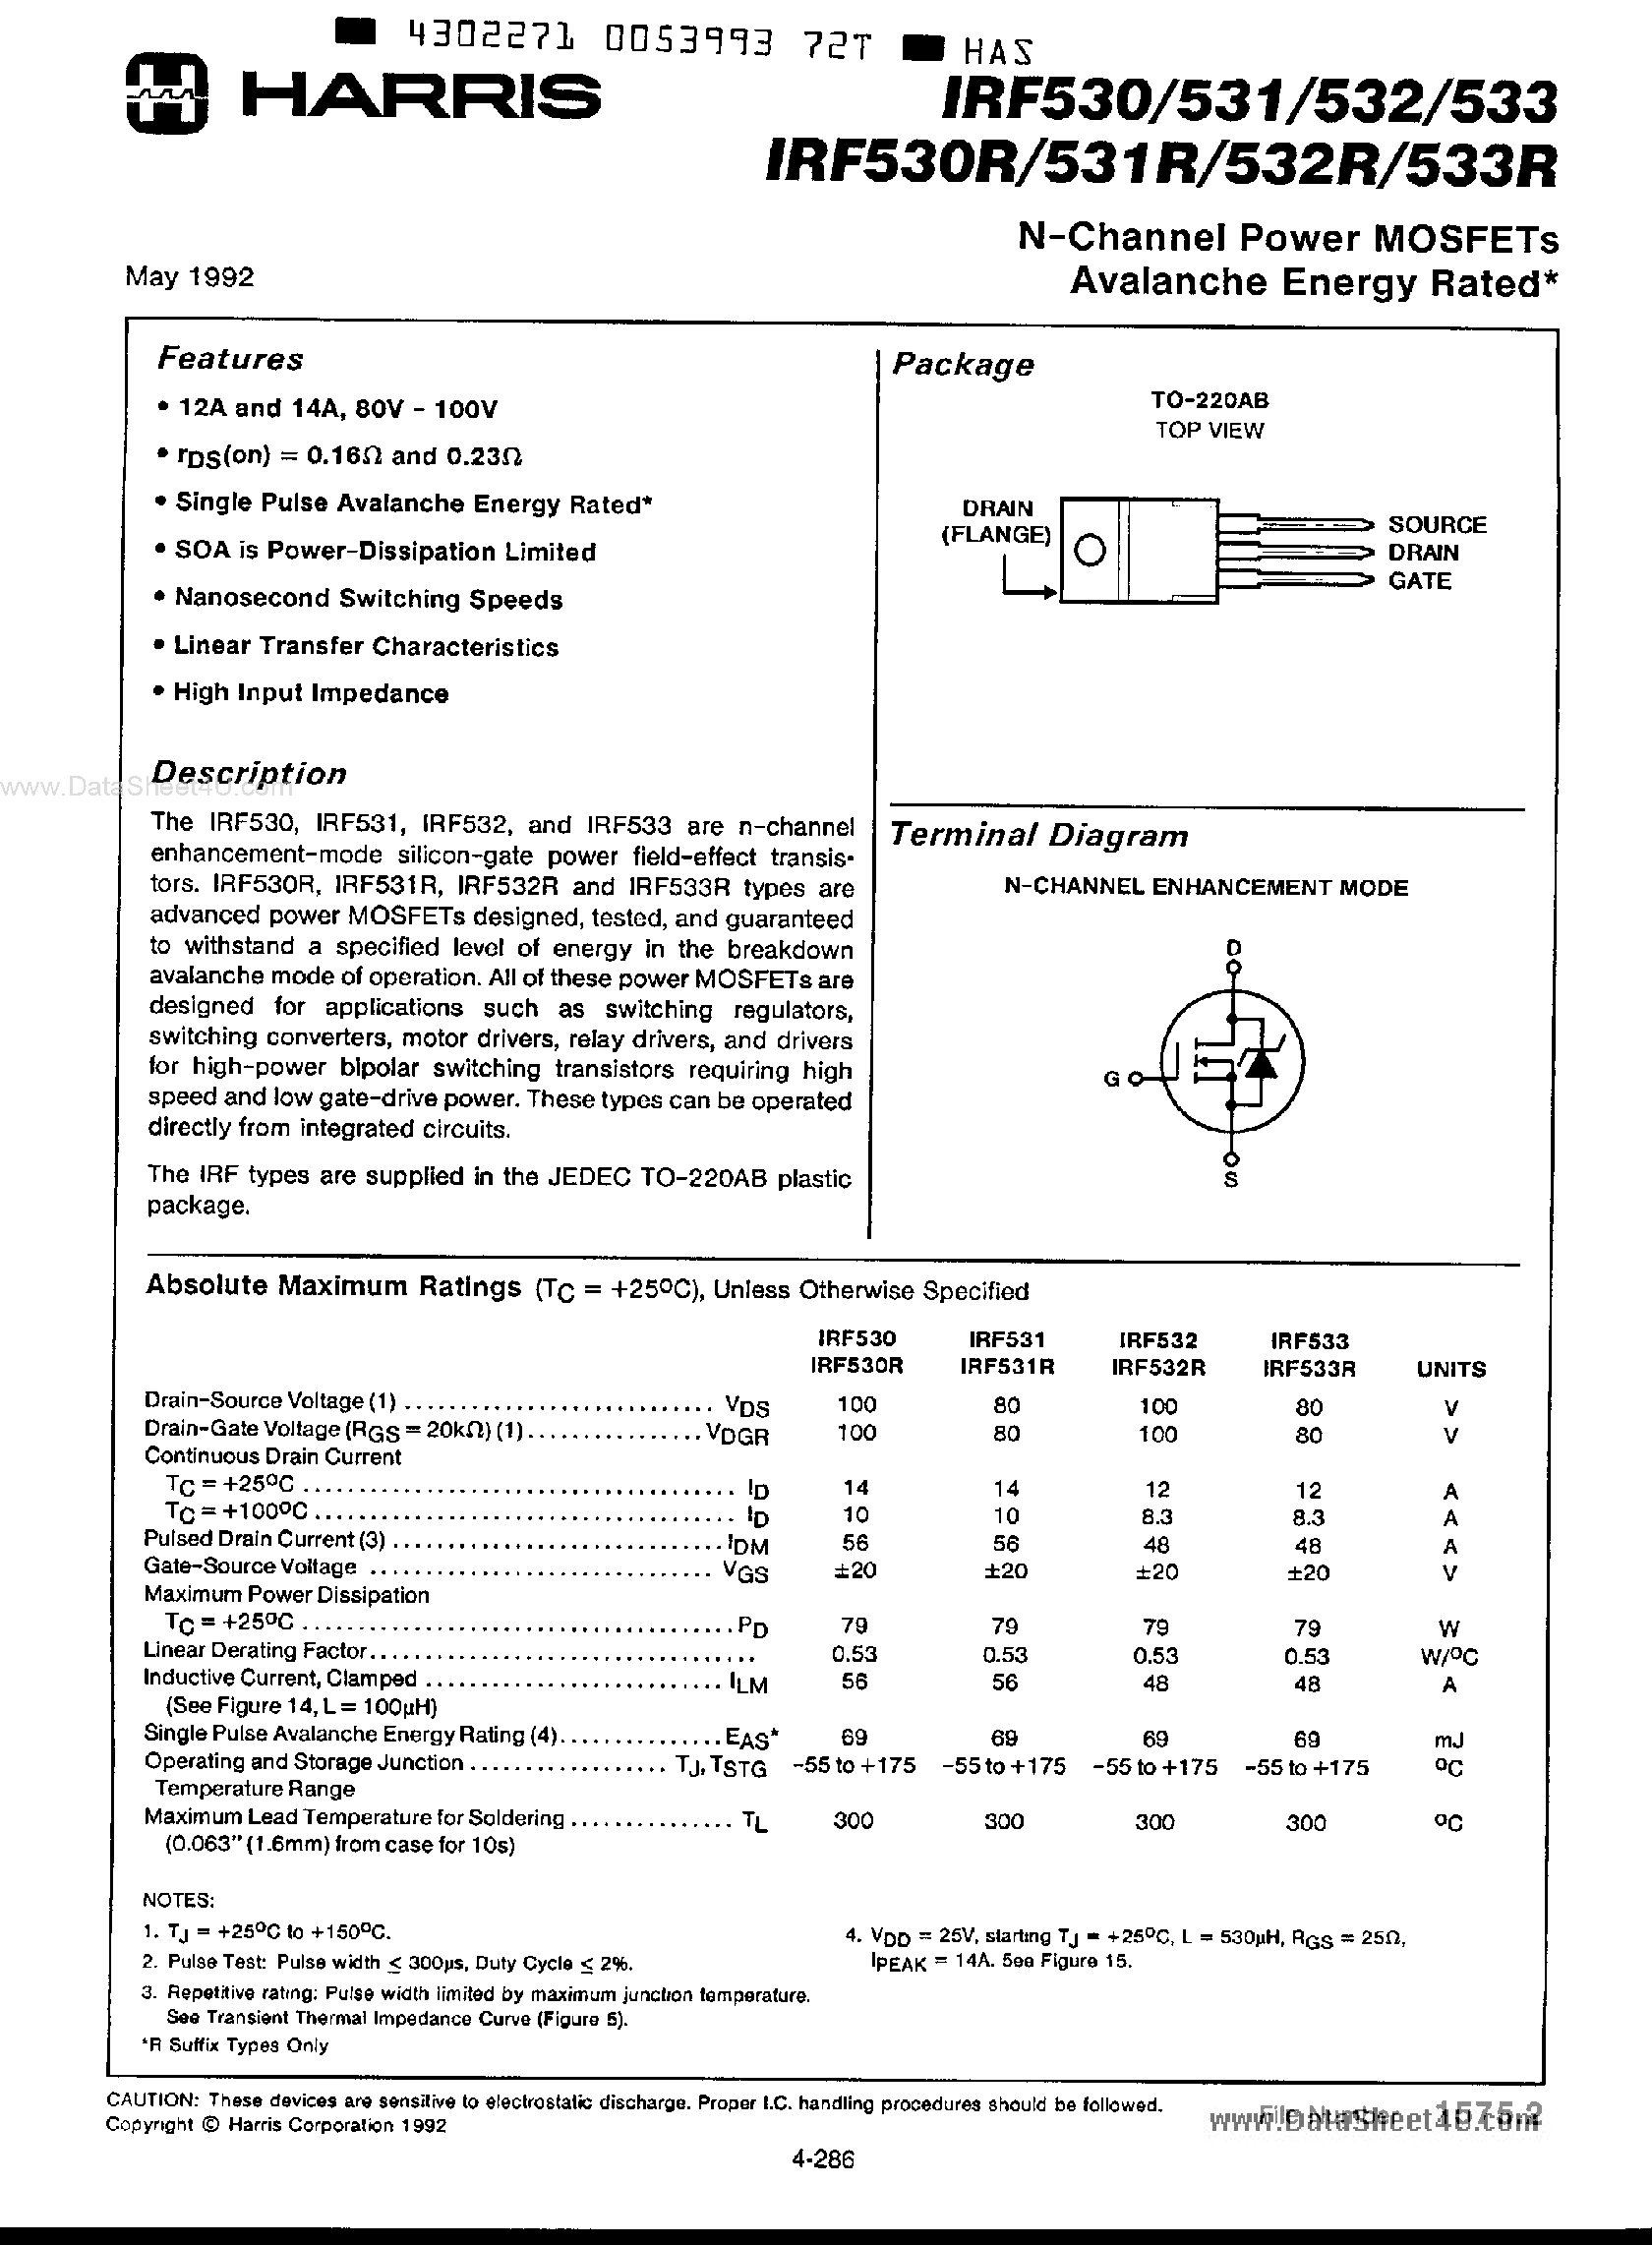 Datasheet IRF530 - (IRF530 - IRF533) N-Channel Power MOSFETs Avalanche Energy Rated page 1